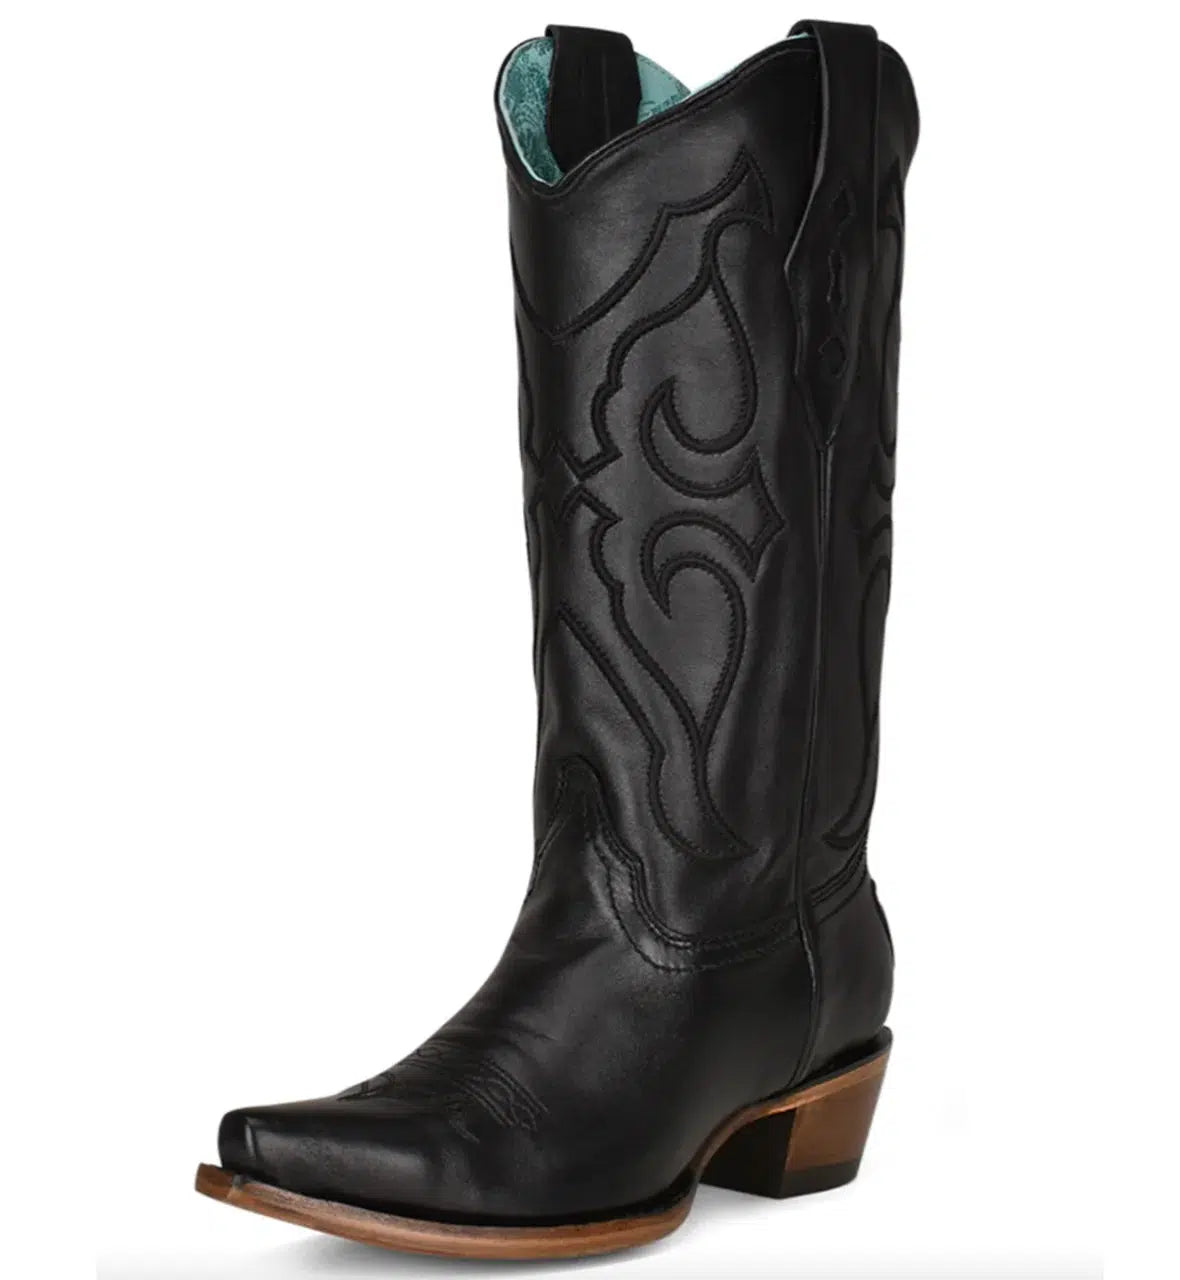 Z5072 - M Corral Black western cowgirl leather boots for women